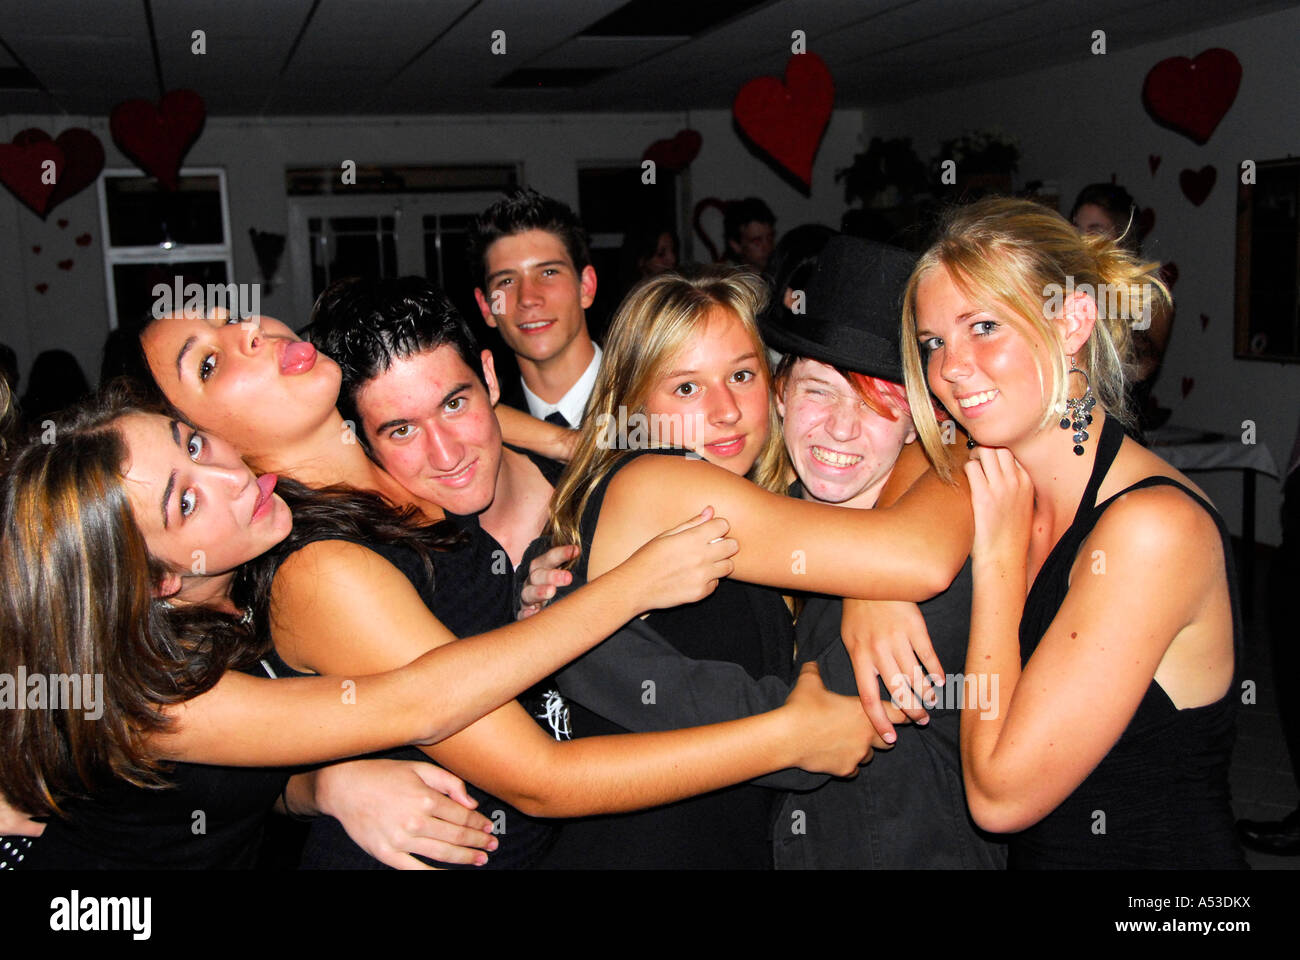 Valentine banquet, teenagers having fun, South Africa Stock Photo